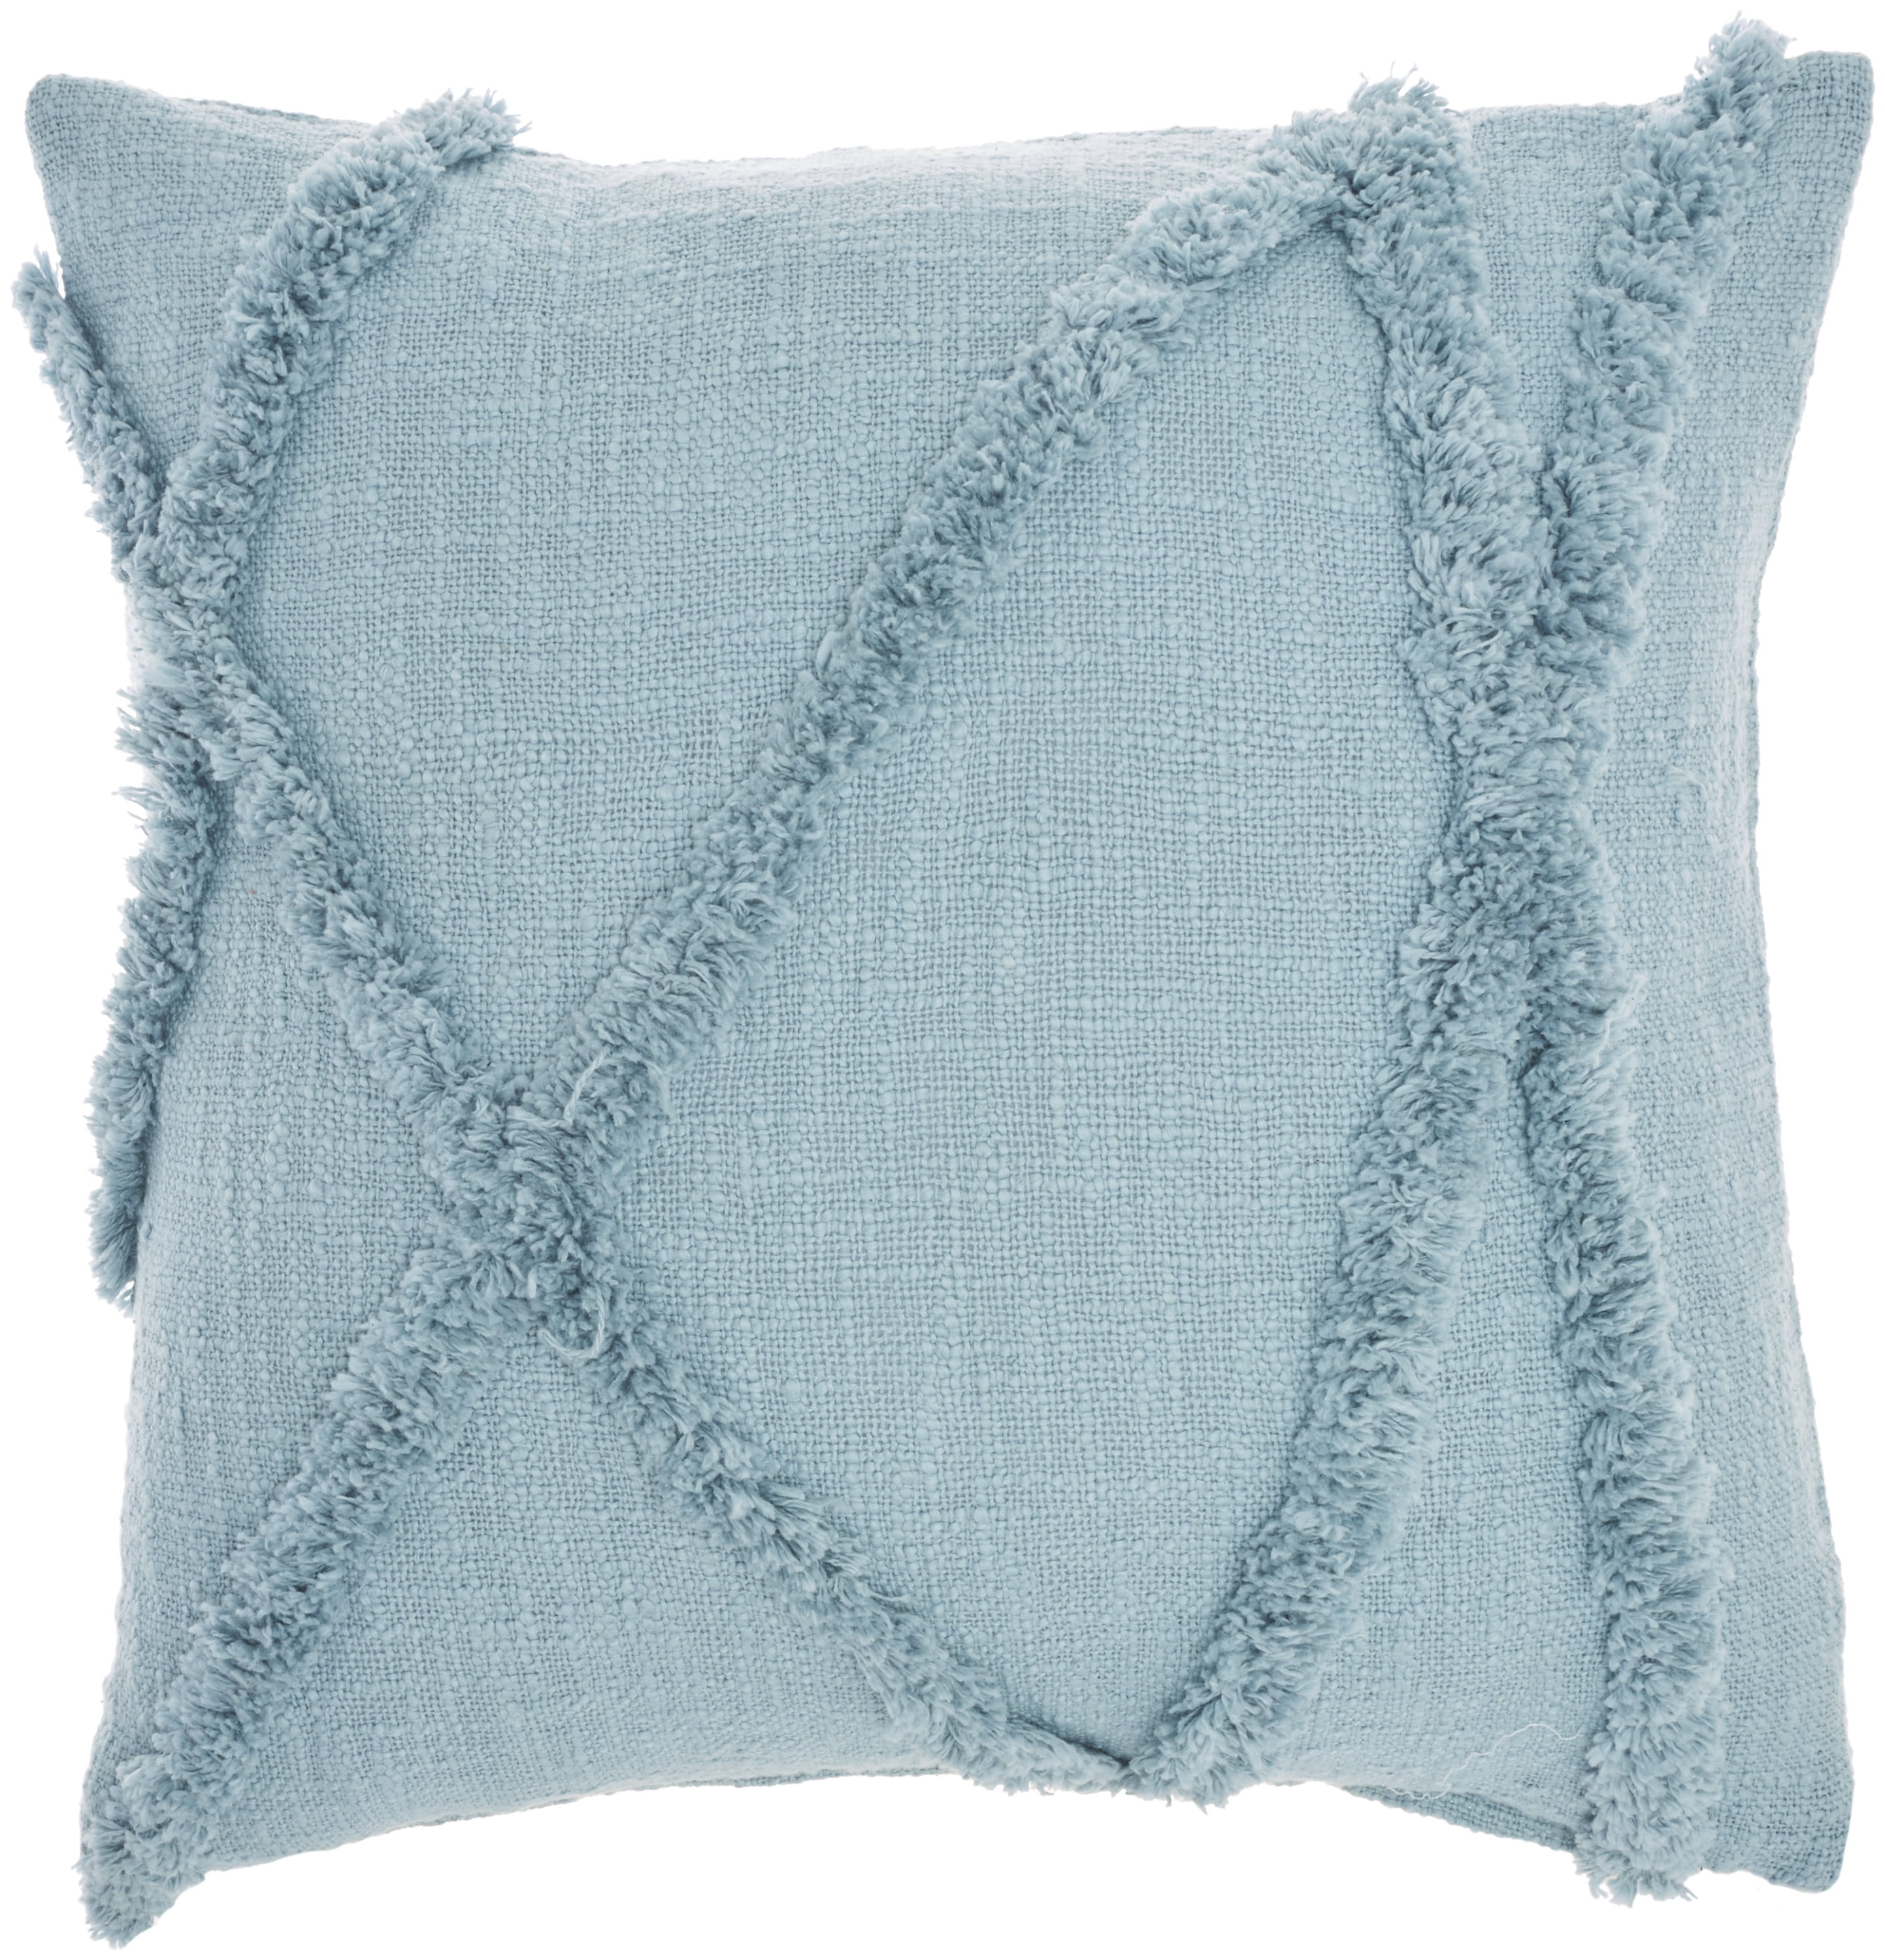 Monarch Chenille 18x18 Mist Blue Throw Pillow with Down